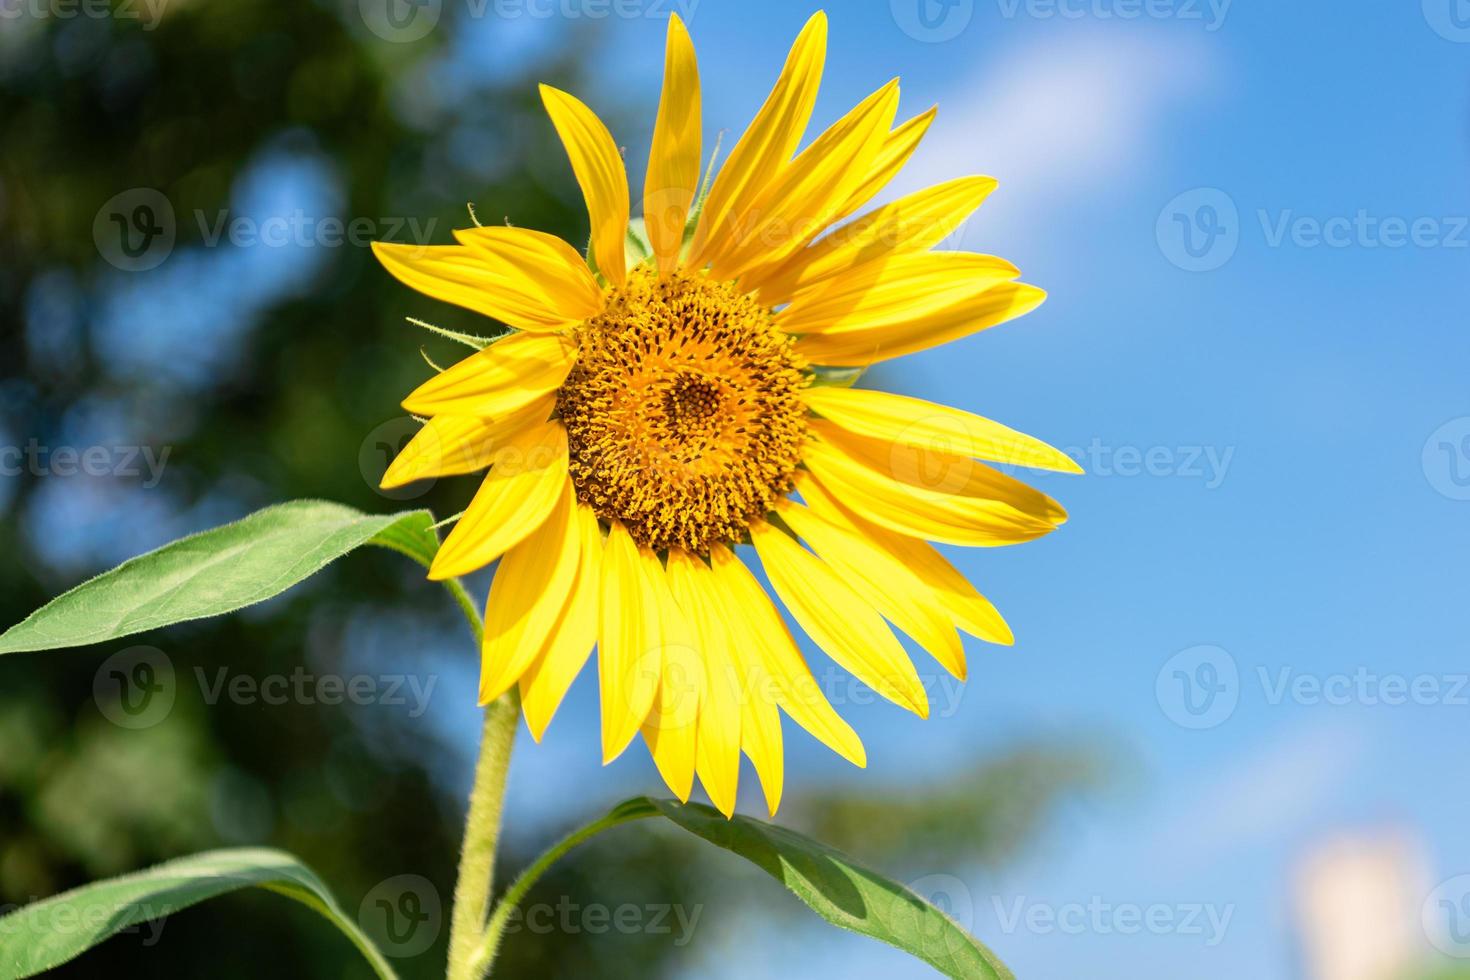 A yellow sunflower in full bloom in the field photo